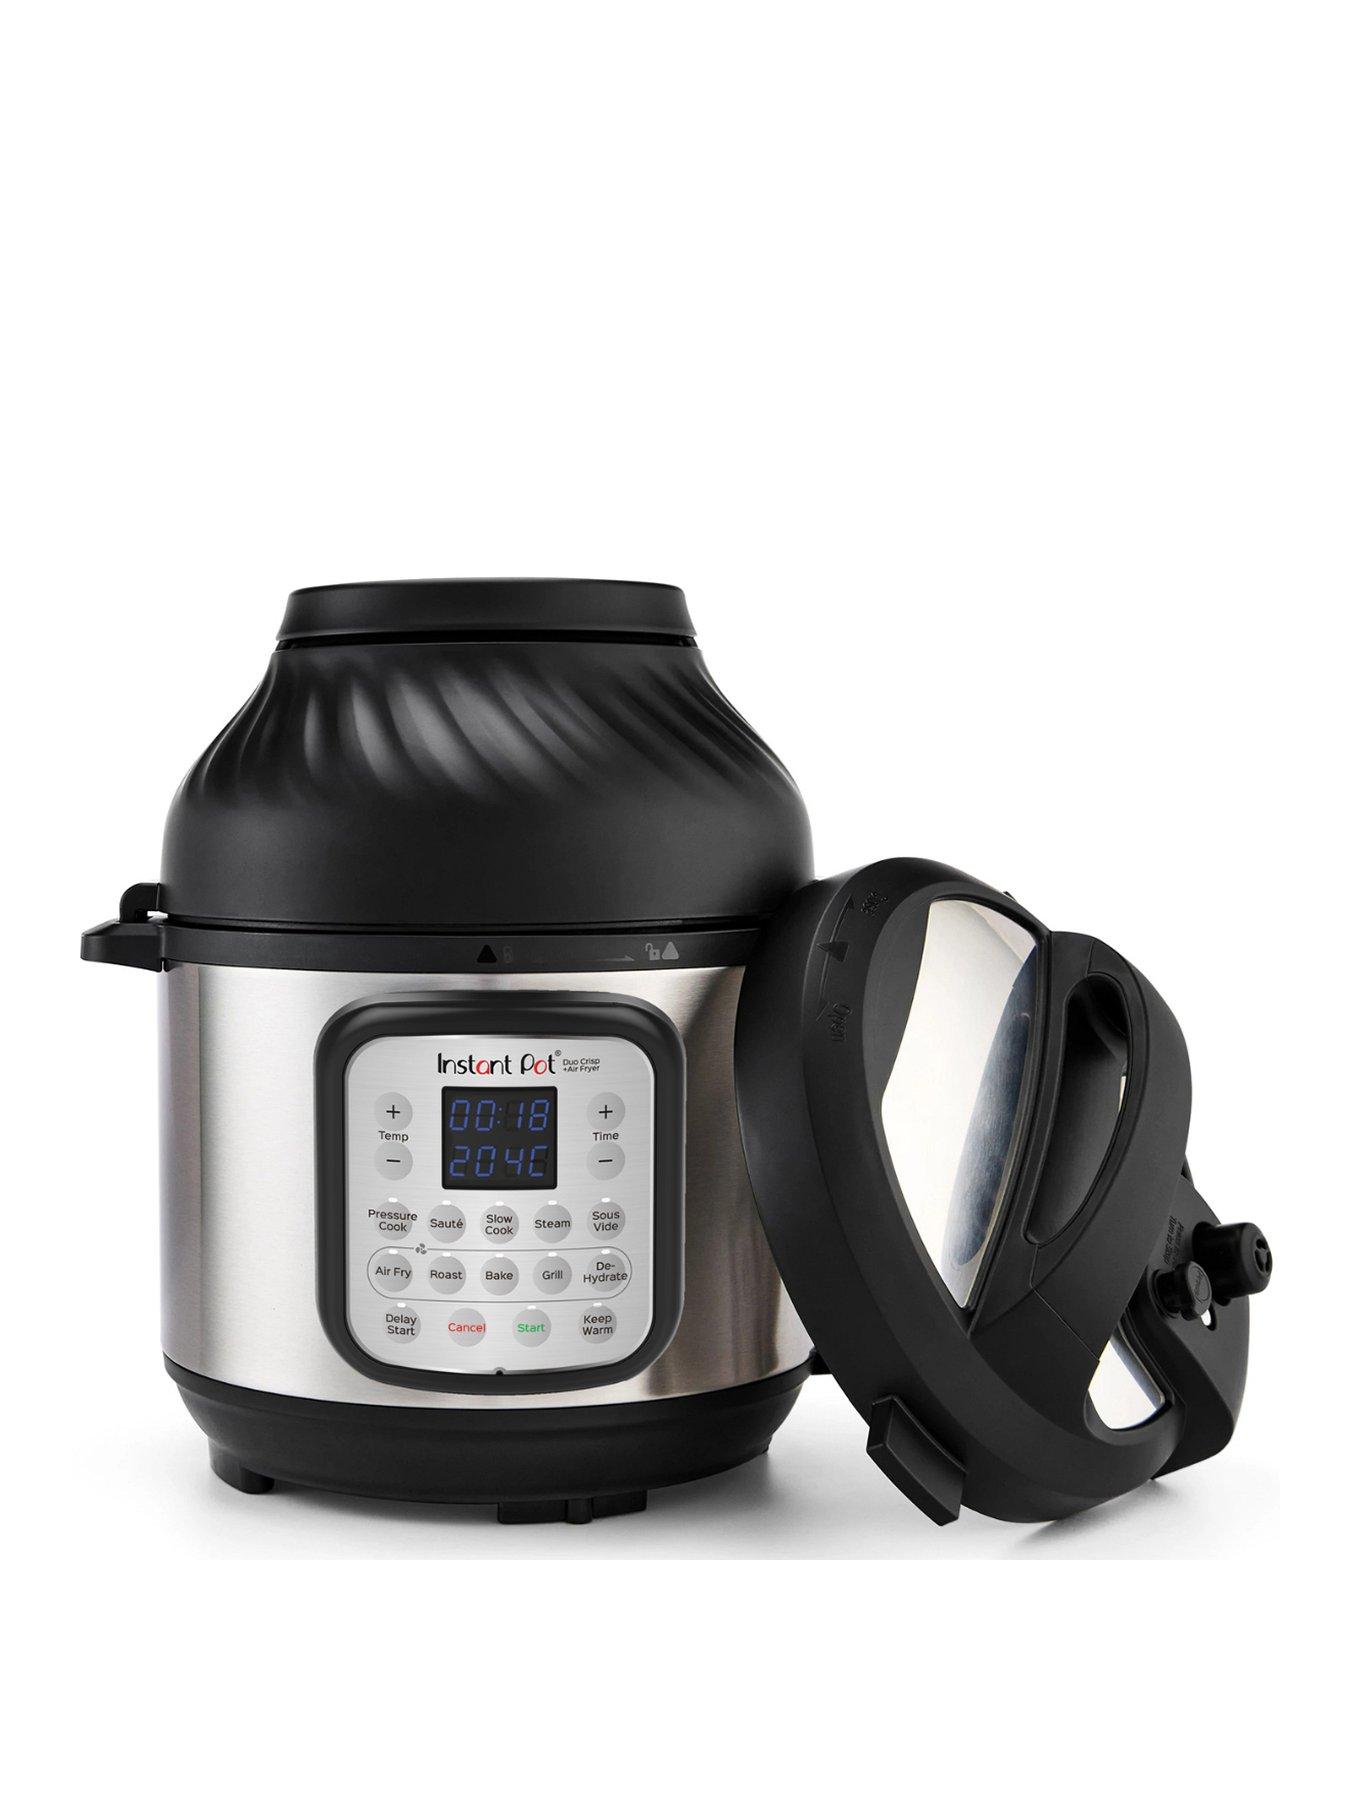 https://media.very.ie/i/littlewoodsireland/VP2QY_SQ1_0000000166_STAINLESS_STEEL_SLf/instant-pot-duo-crisp-air-fryer-amp-smart-cooker-57l-air-fryer-pressure-cooker-slow-cooker-rice-cooker-saute-pan-grill-and-more.jpg?$180x240_retinamobilex2$